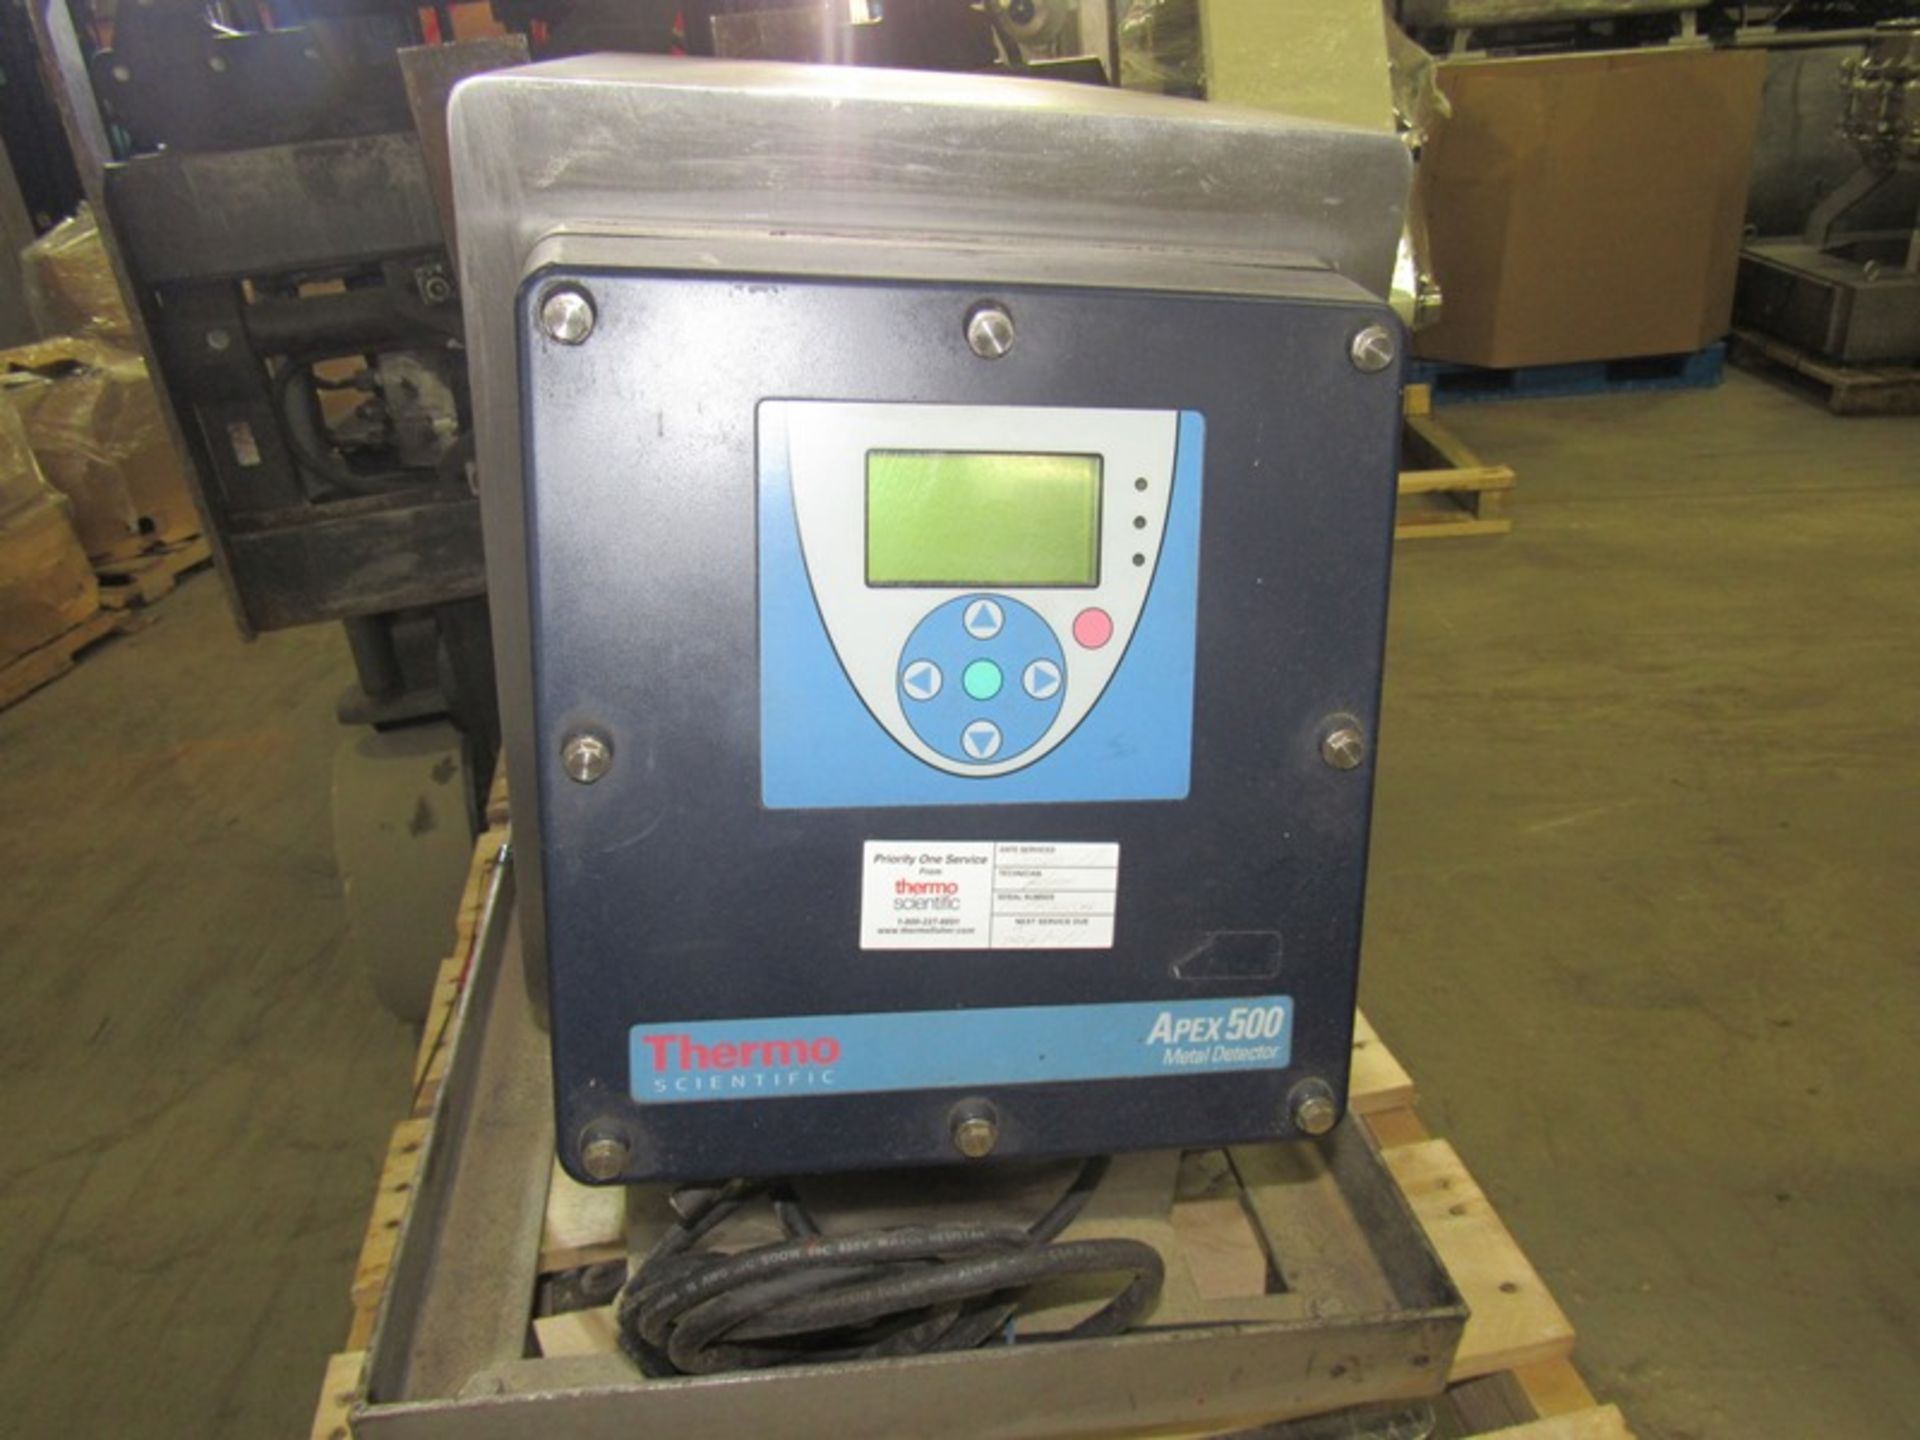 Thermo Mdl. Apex 500 Metal Detector Aperture, 11 3/4" W X 5 3/4" T opening, Located in Sandwich, IL - Image 3 of 3